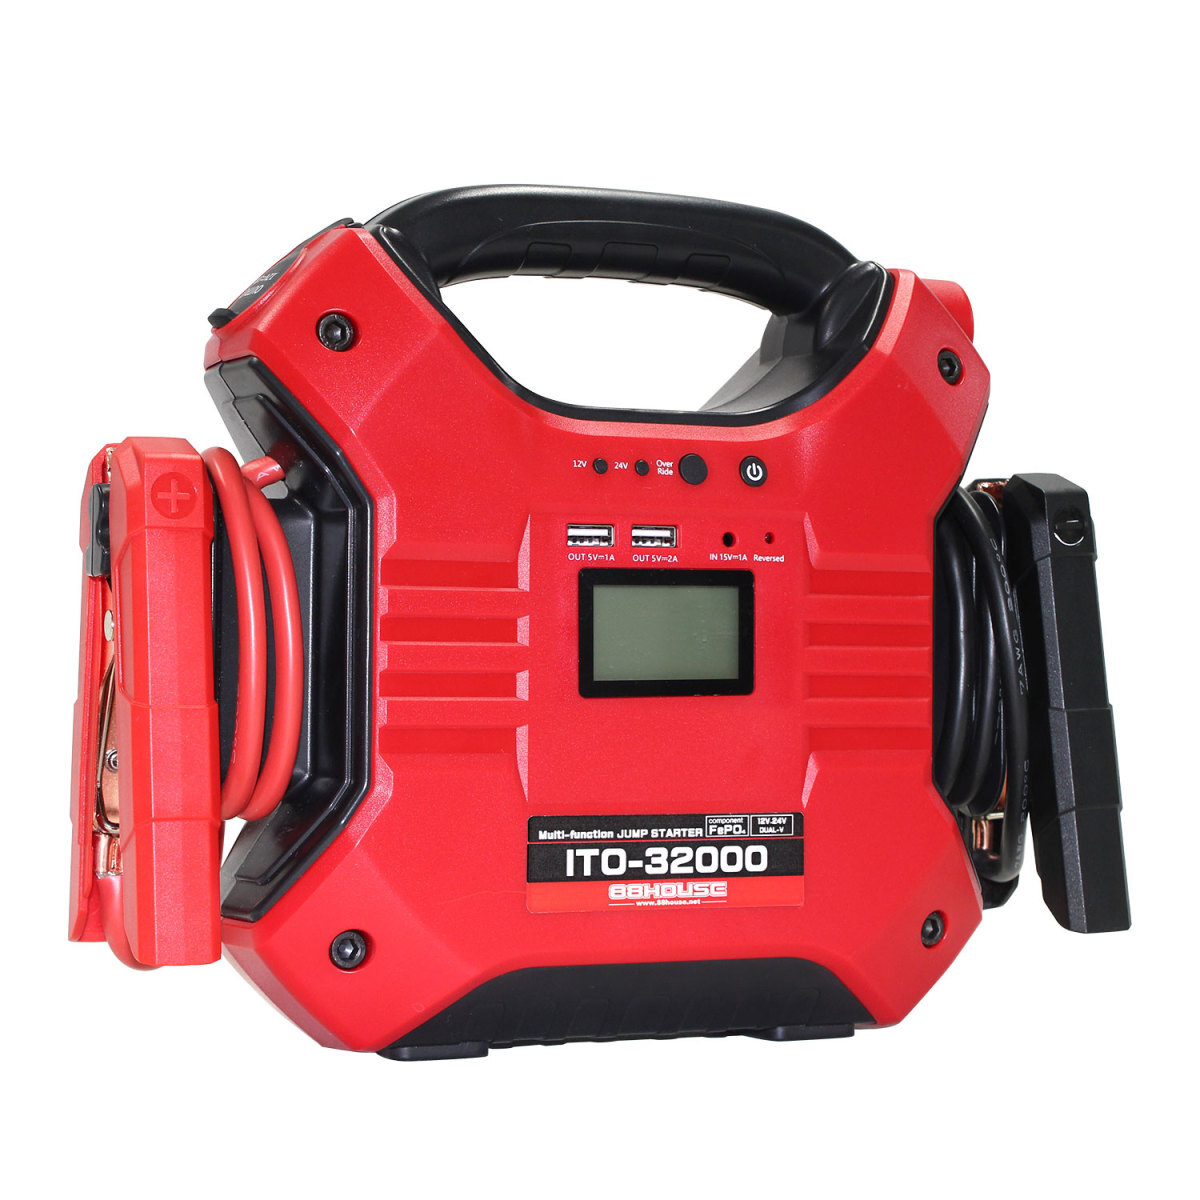  stock number pcs! great popularity! high capacity Li-FePO4 ITO 32000mAh 12V 24V combined use Lynn acid iron lithium ion Jump starter protection circuit built-in L1614 88